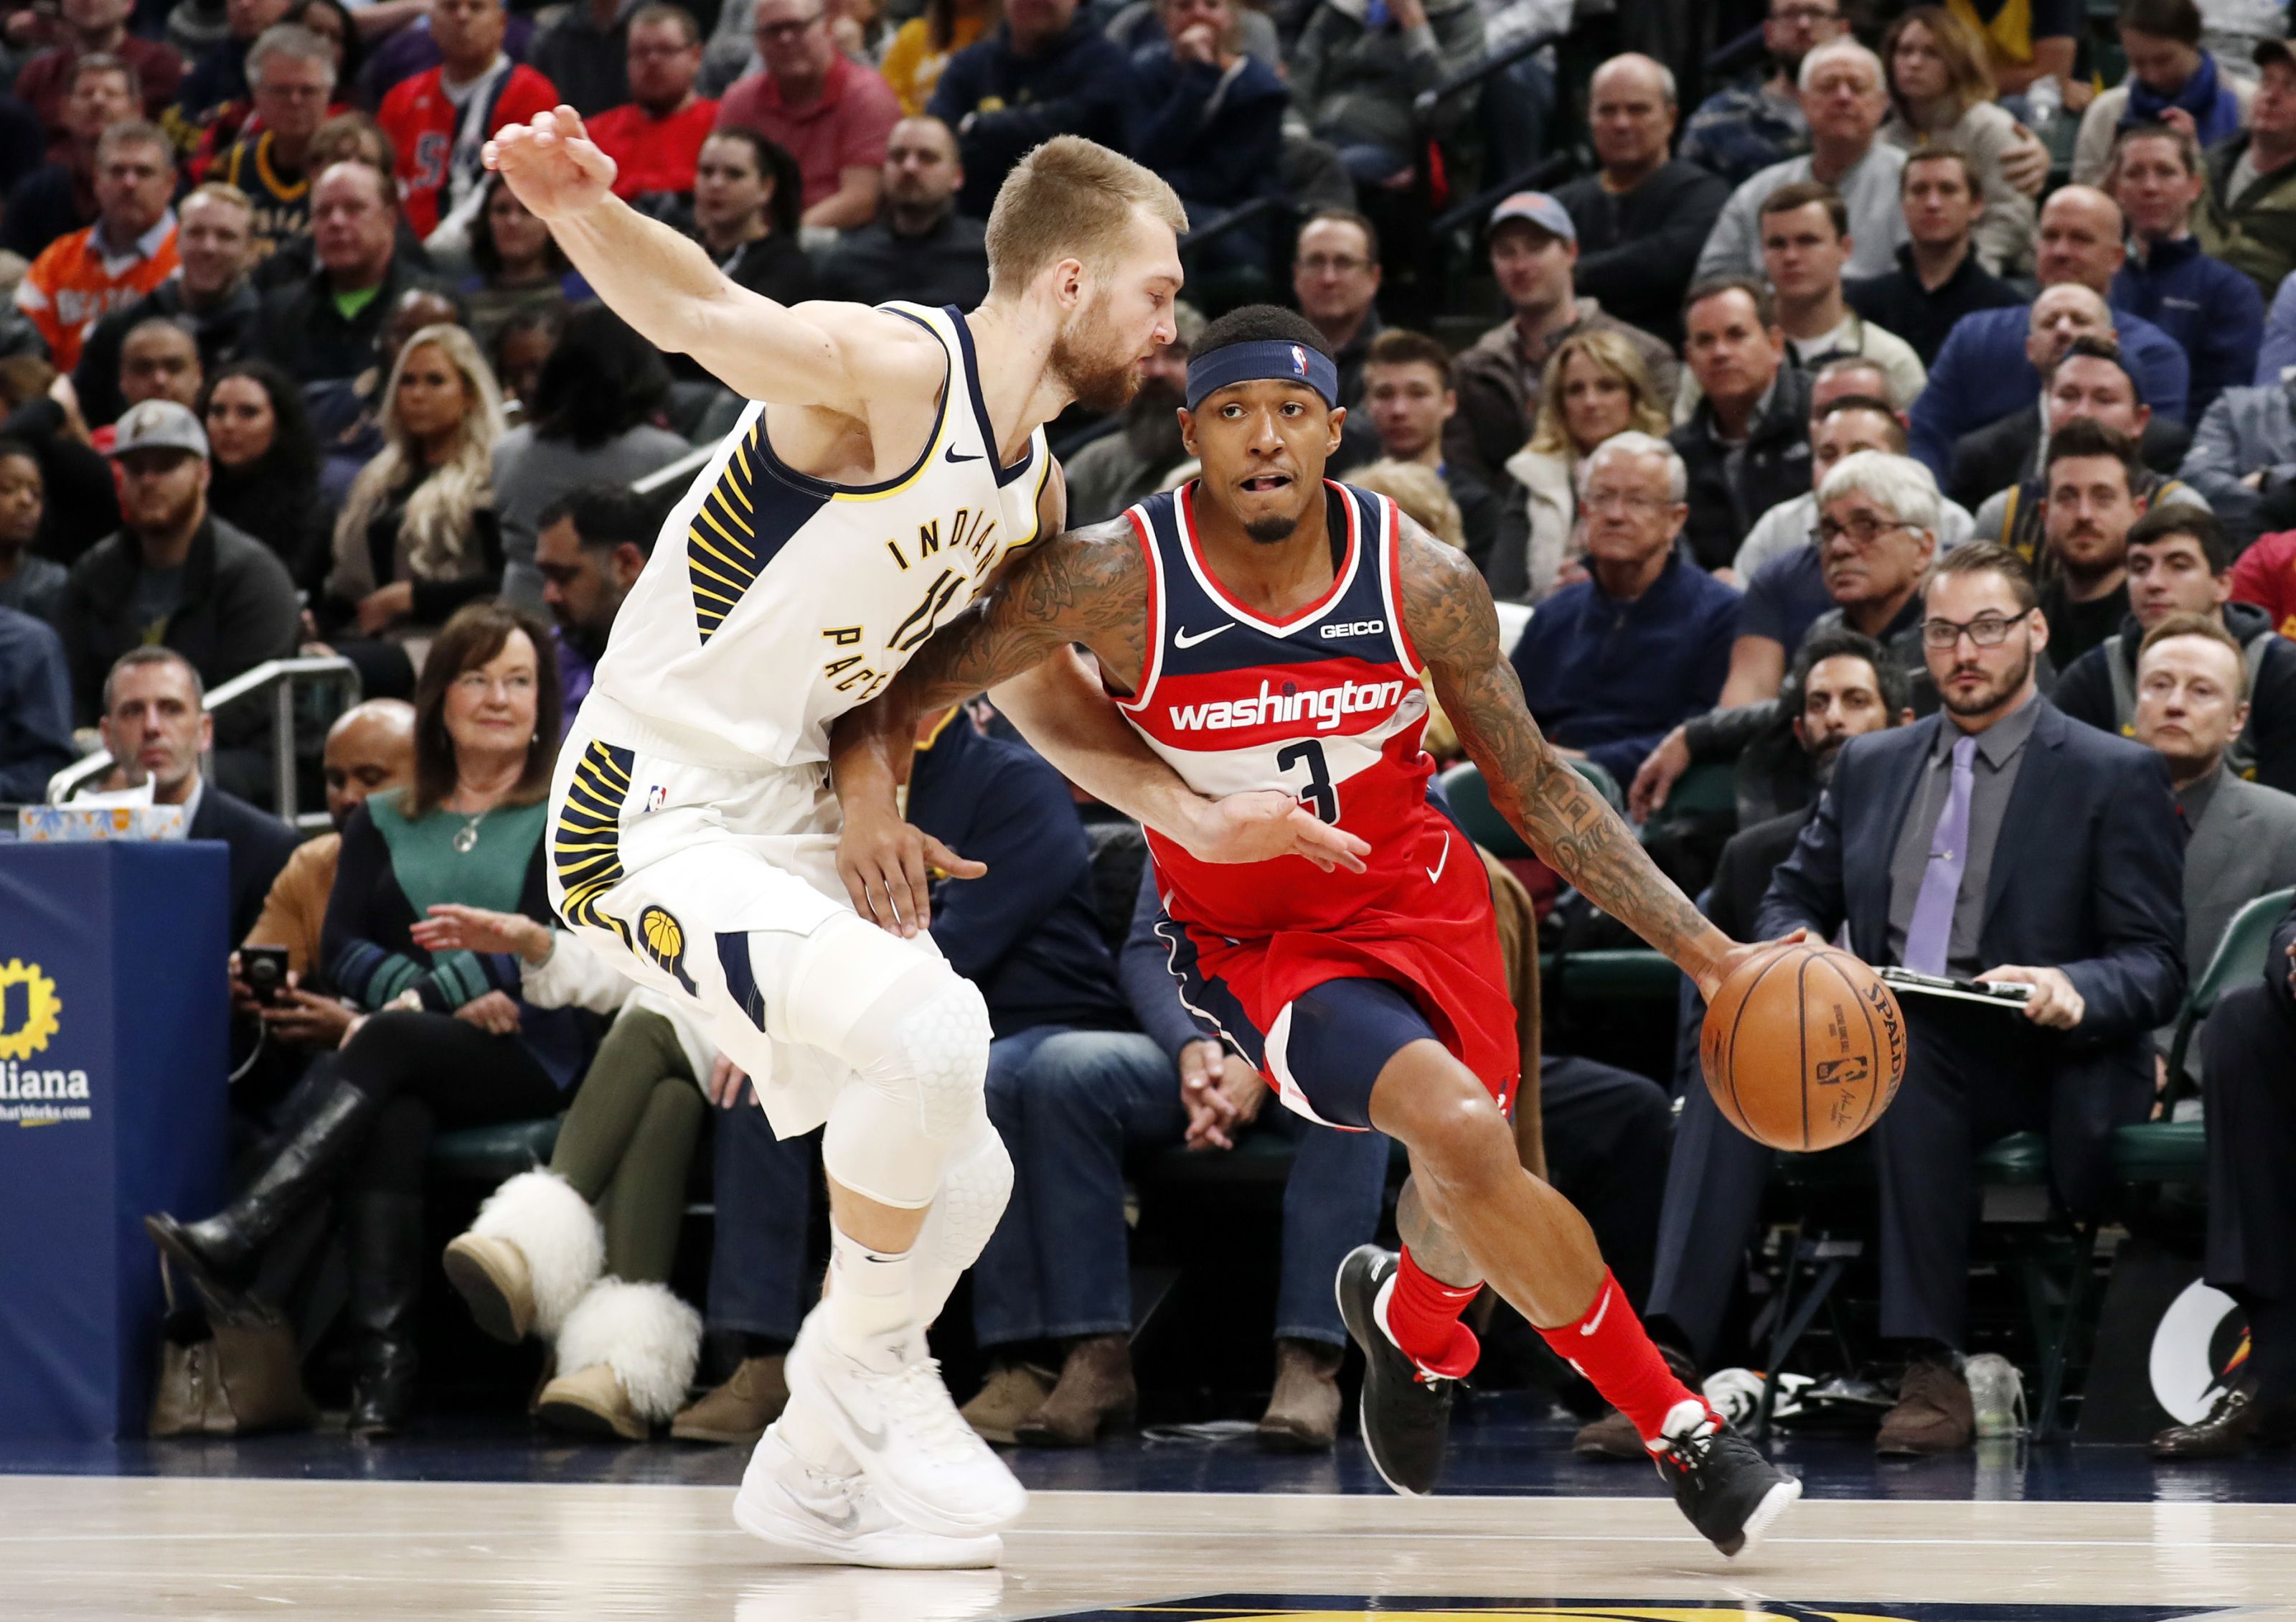 Indiana Pacers vs Washington Wizards Prediction, Betting Tips & Odds │7 DECEMBER, 2021